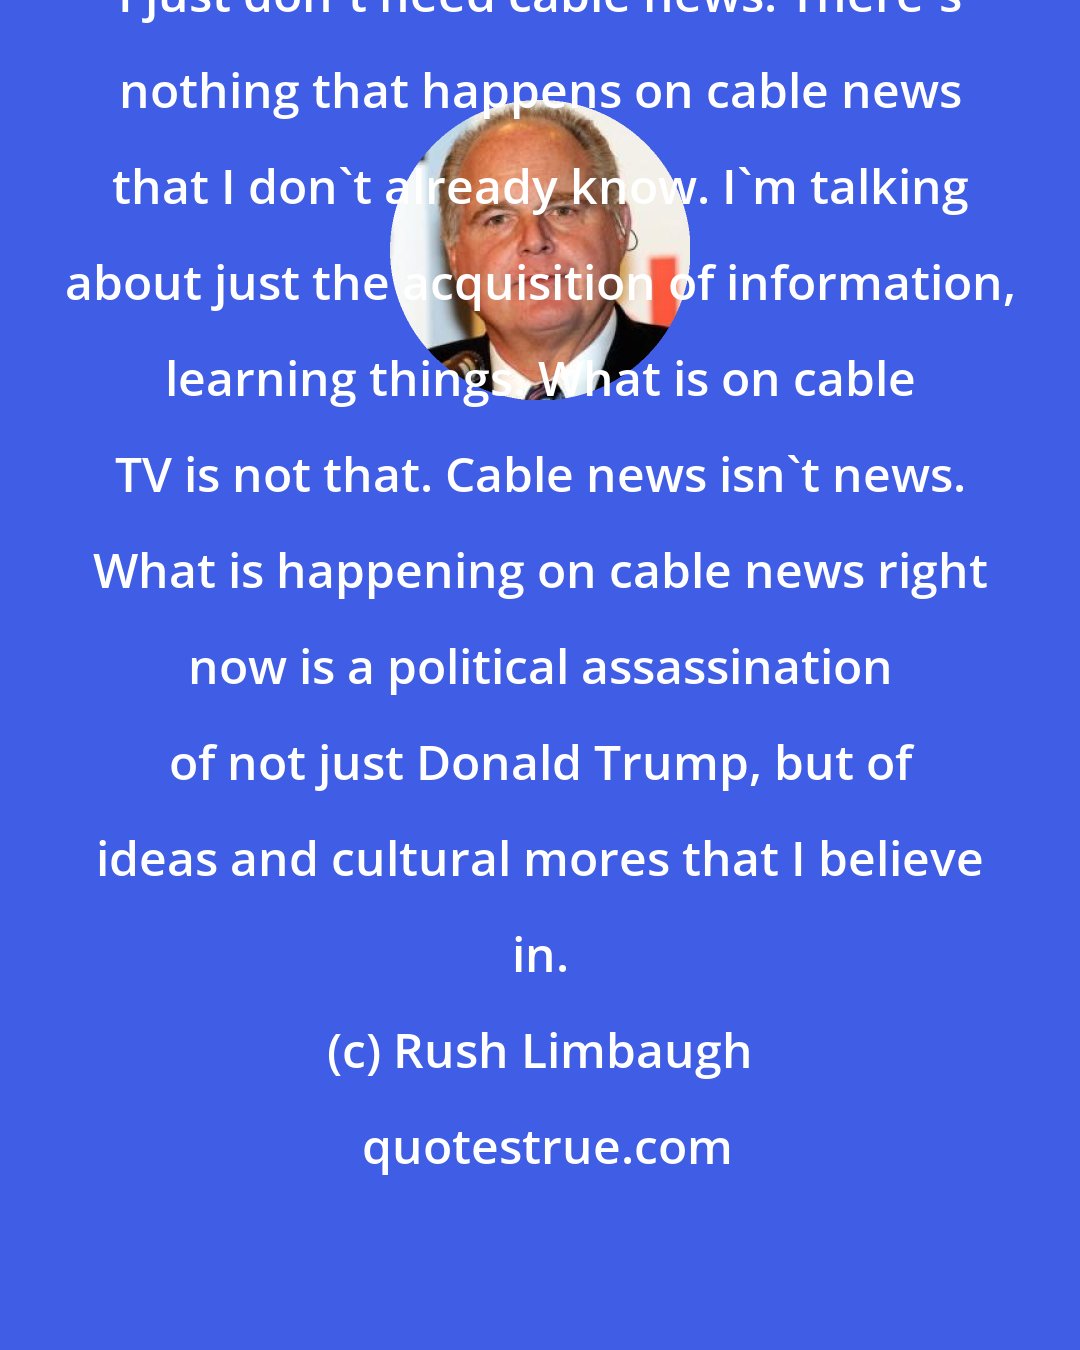 Rush Limbaugh: I just don't need cable news. There's nothing that happens on cable news that I don't already know. I'm talking about just the acquisition of information, learning things. What is on cable TV is not that. Cable news isn't news. What is happening on cable news right now is a political assassination of not just Donald Trump, but of ideas and cultural mores that I believe in.